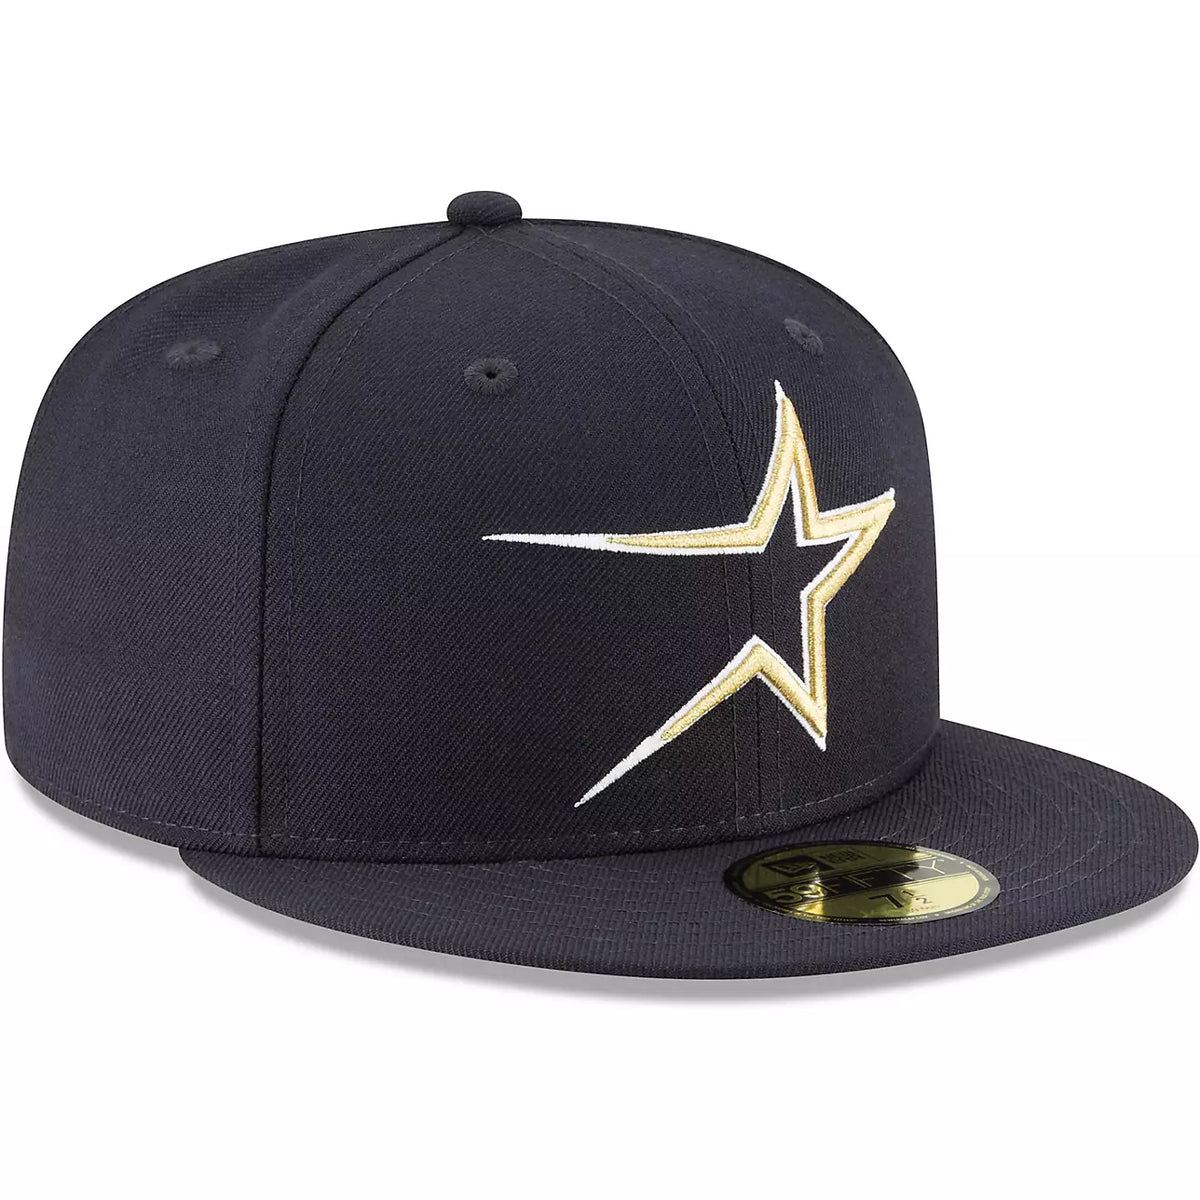 New Era Houston Astros Fitted Hat- NAVY BLUE/ GOLD